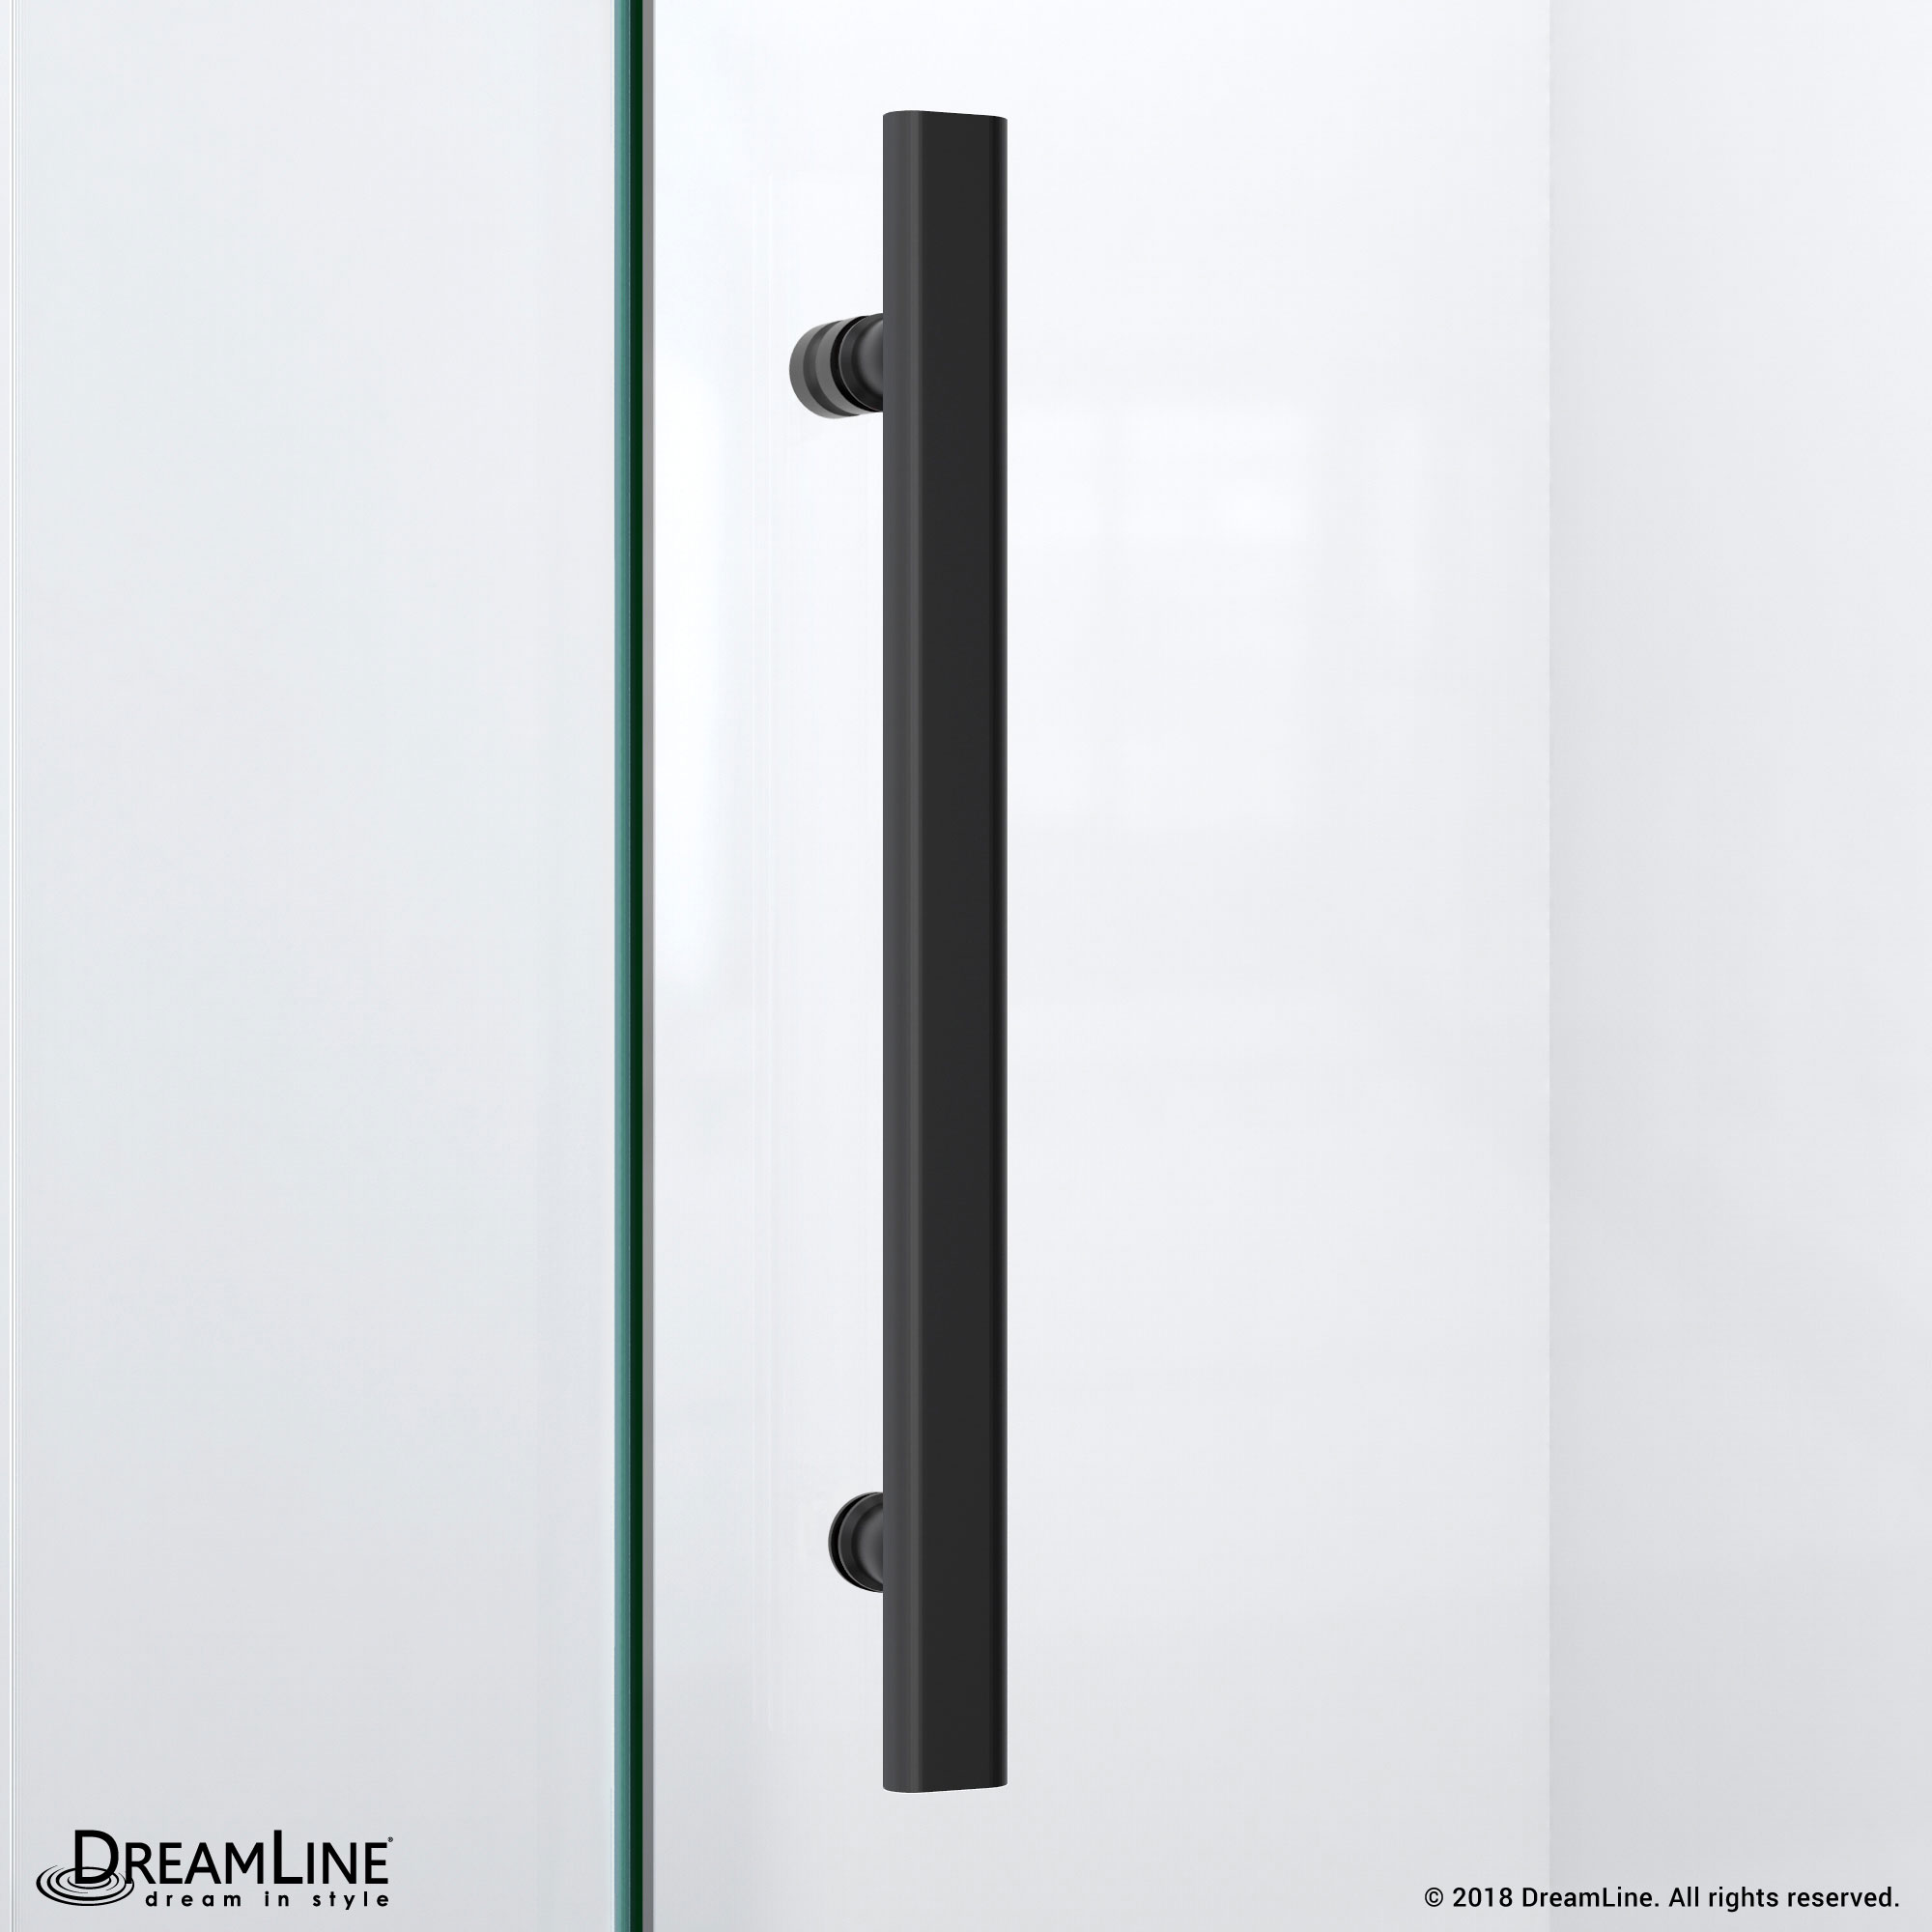 DreamLine Prism Lux 36 5/16 in. D x 36 5/16 in. W x 72 in. H Fully Frameless Hinged Shower Enclosure in Satin Black